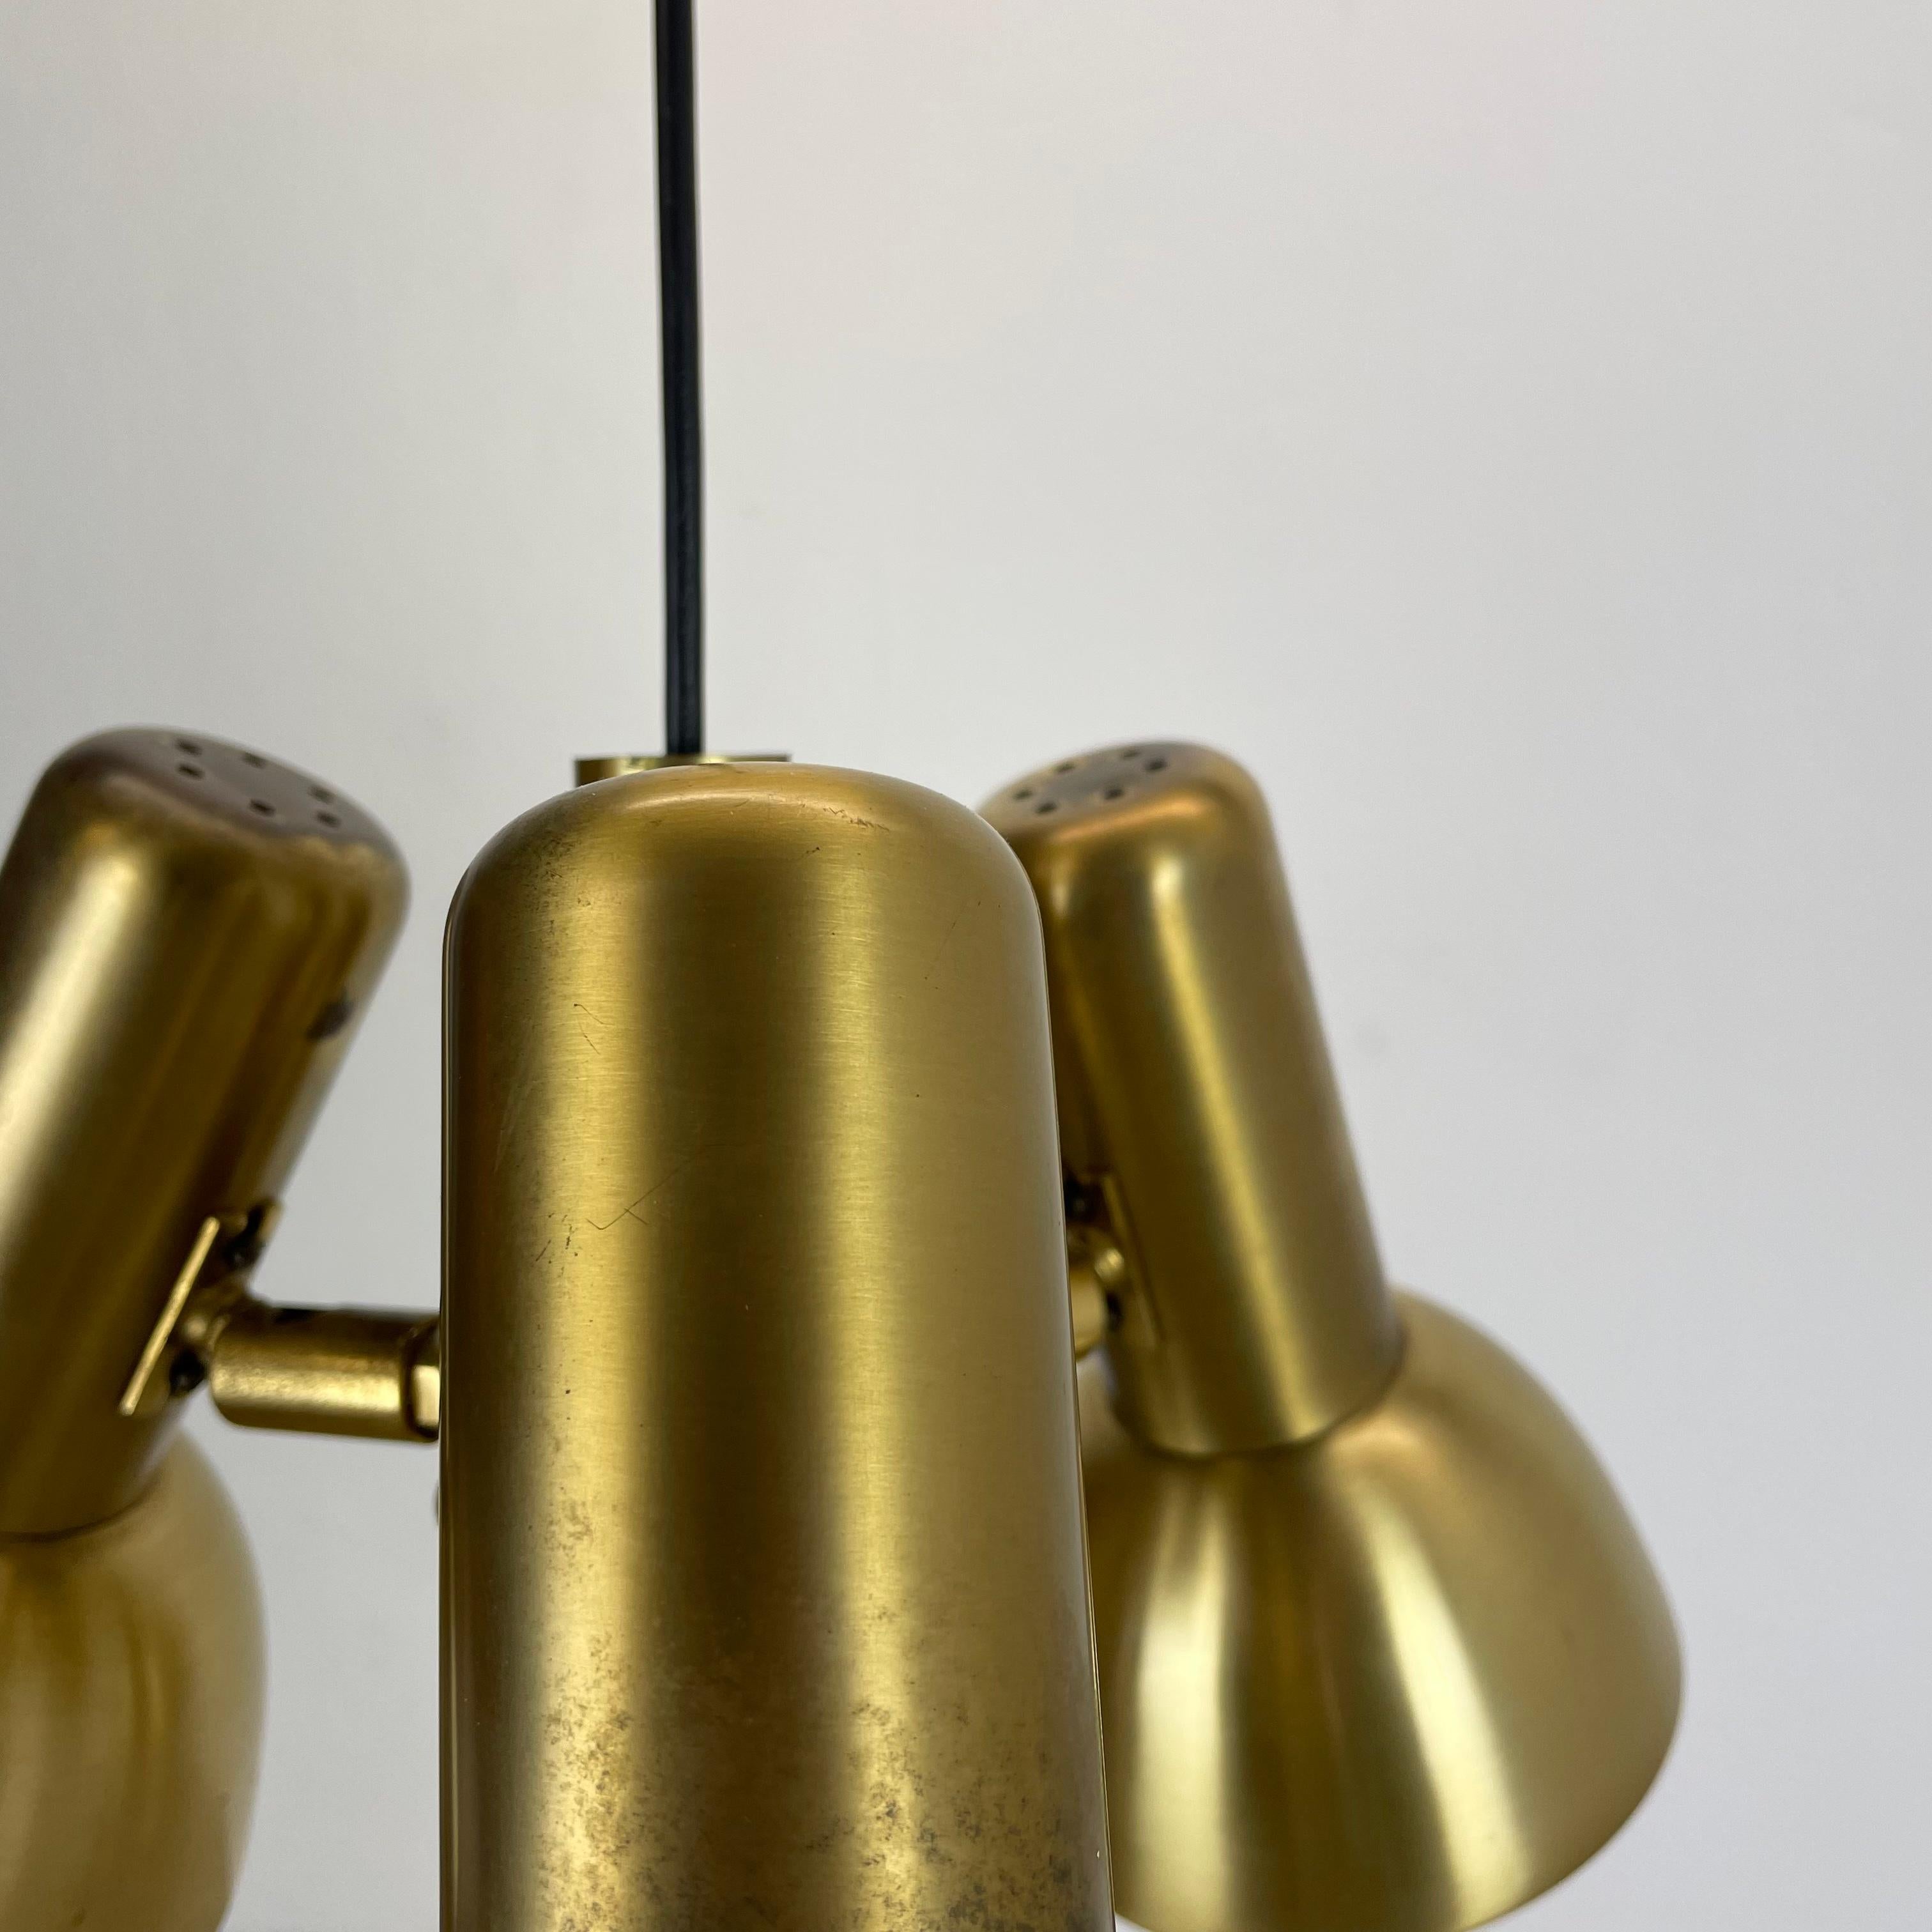 3-Spot Brass Tone Hanging Light Koch and Lowy Style OMI Lighting, Germany, 1970 For Sale 6